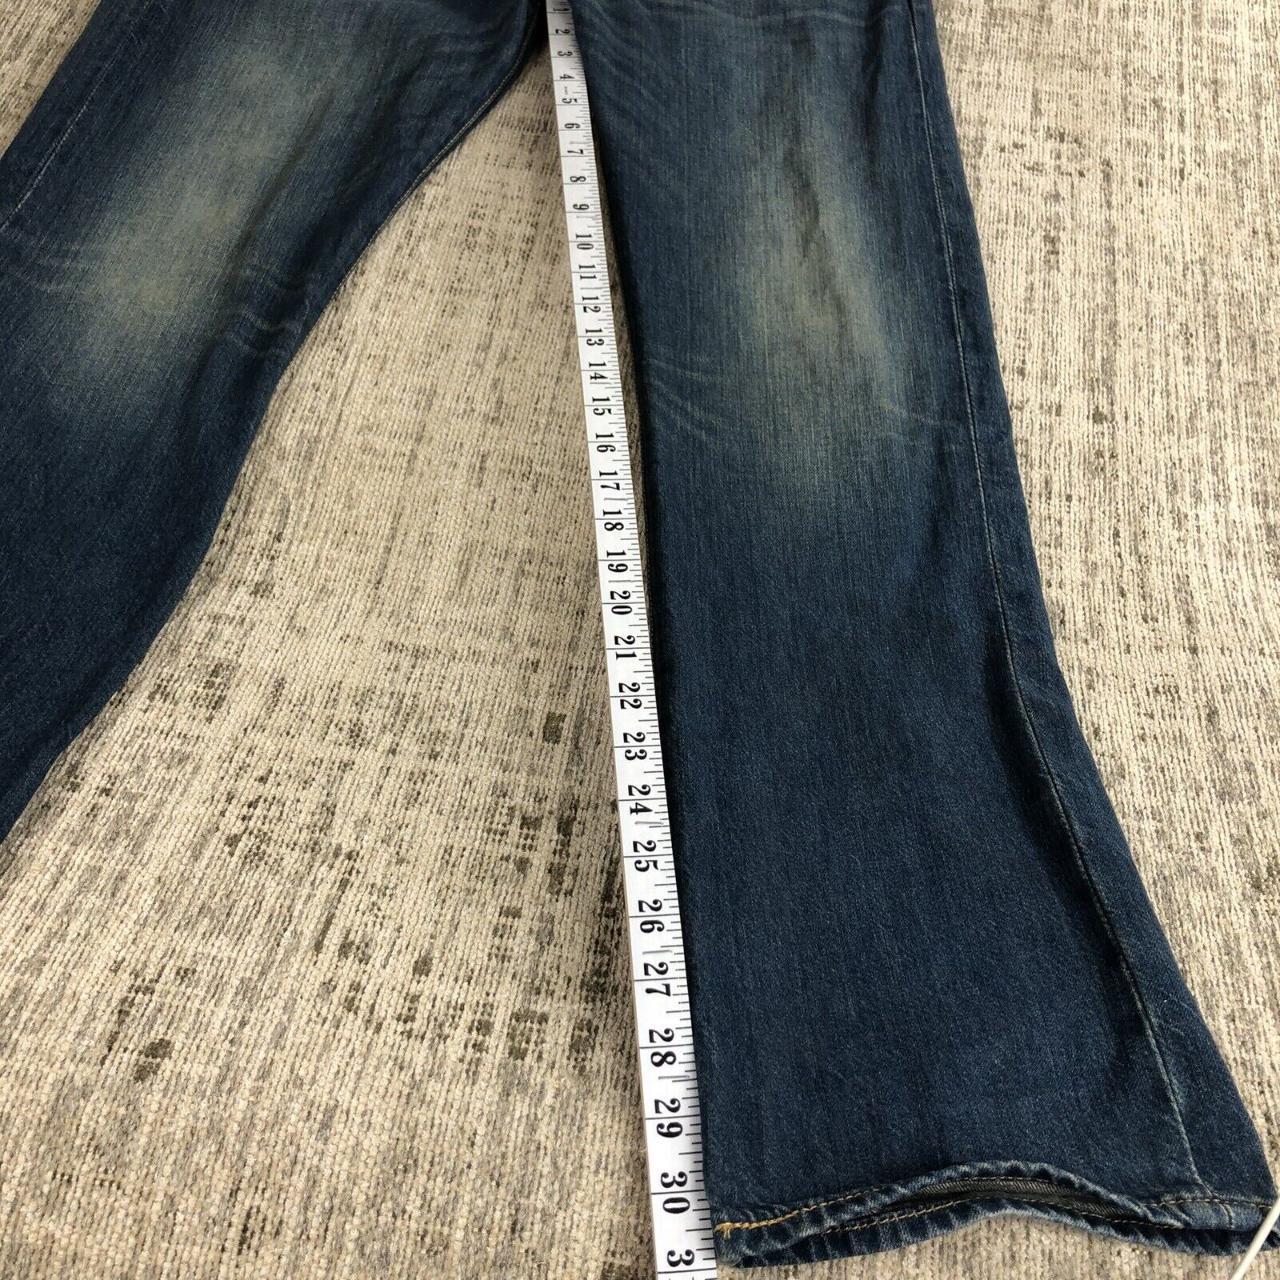 Levi jeans 501 men's distressed stain straight... - Depop